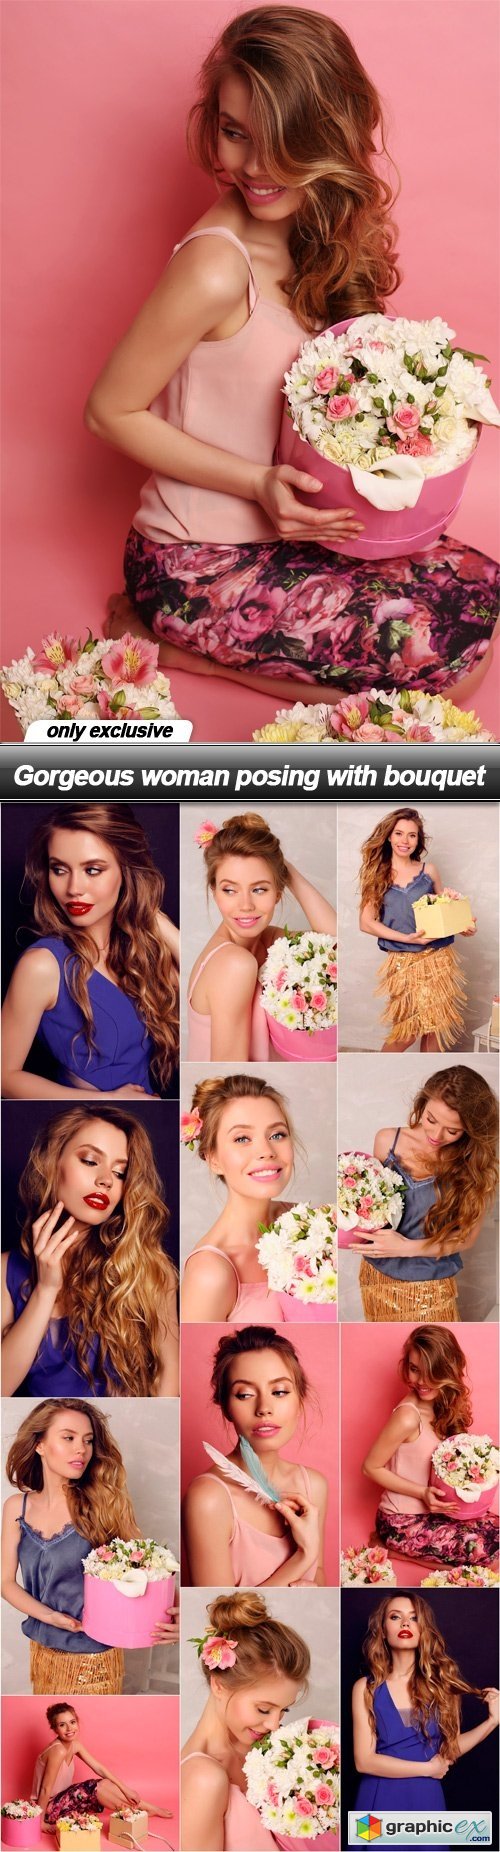 Gorgeous woman posing with bouquet - 12 UHQ JPEG